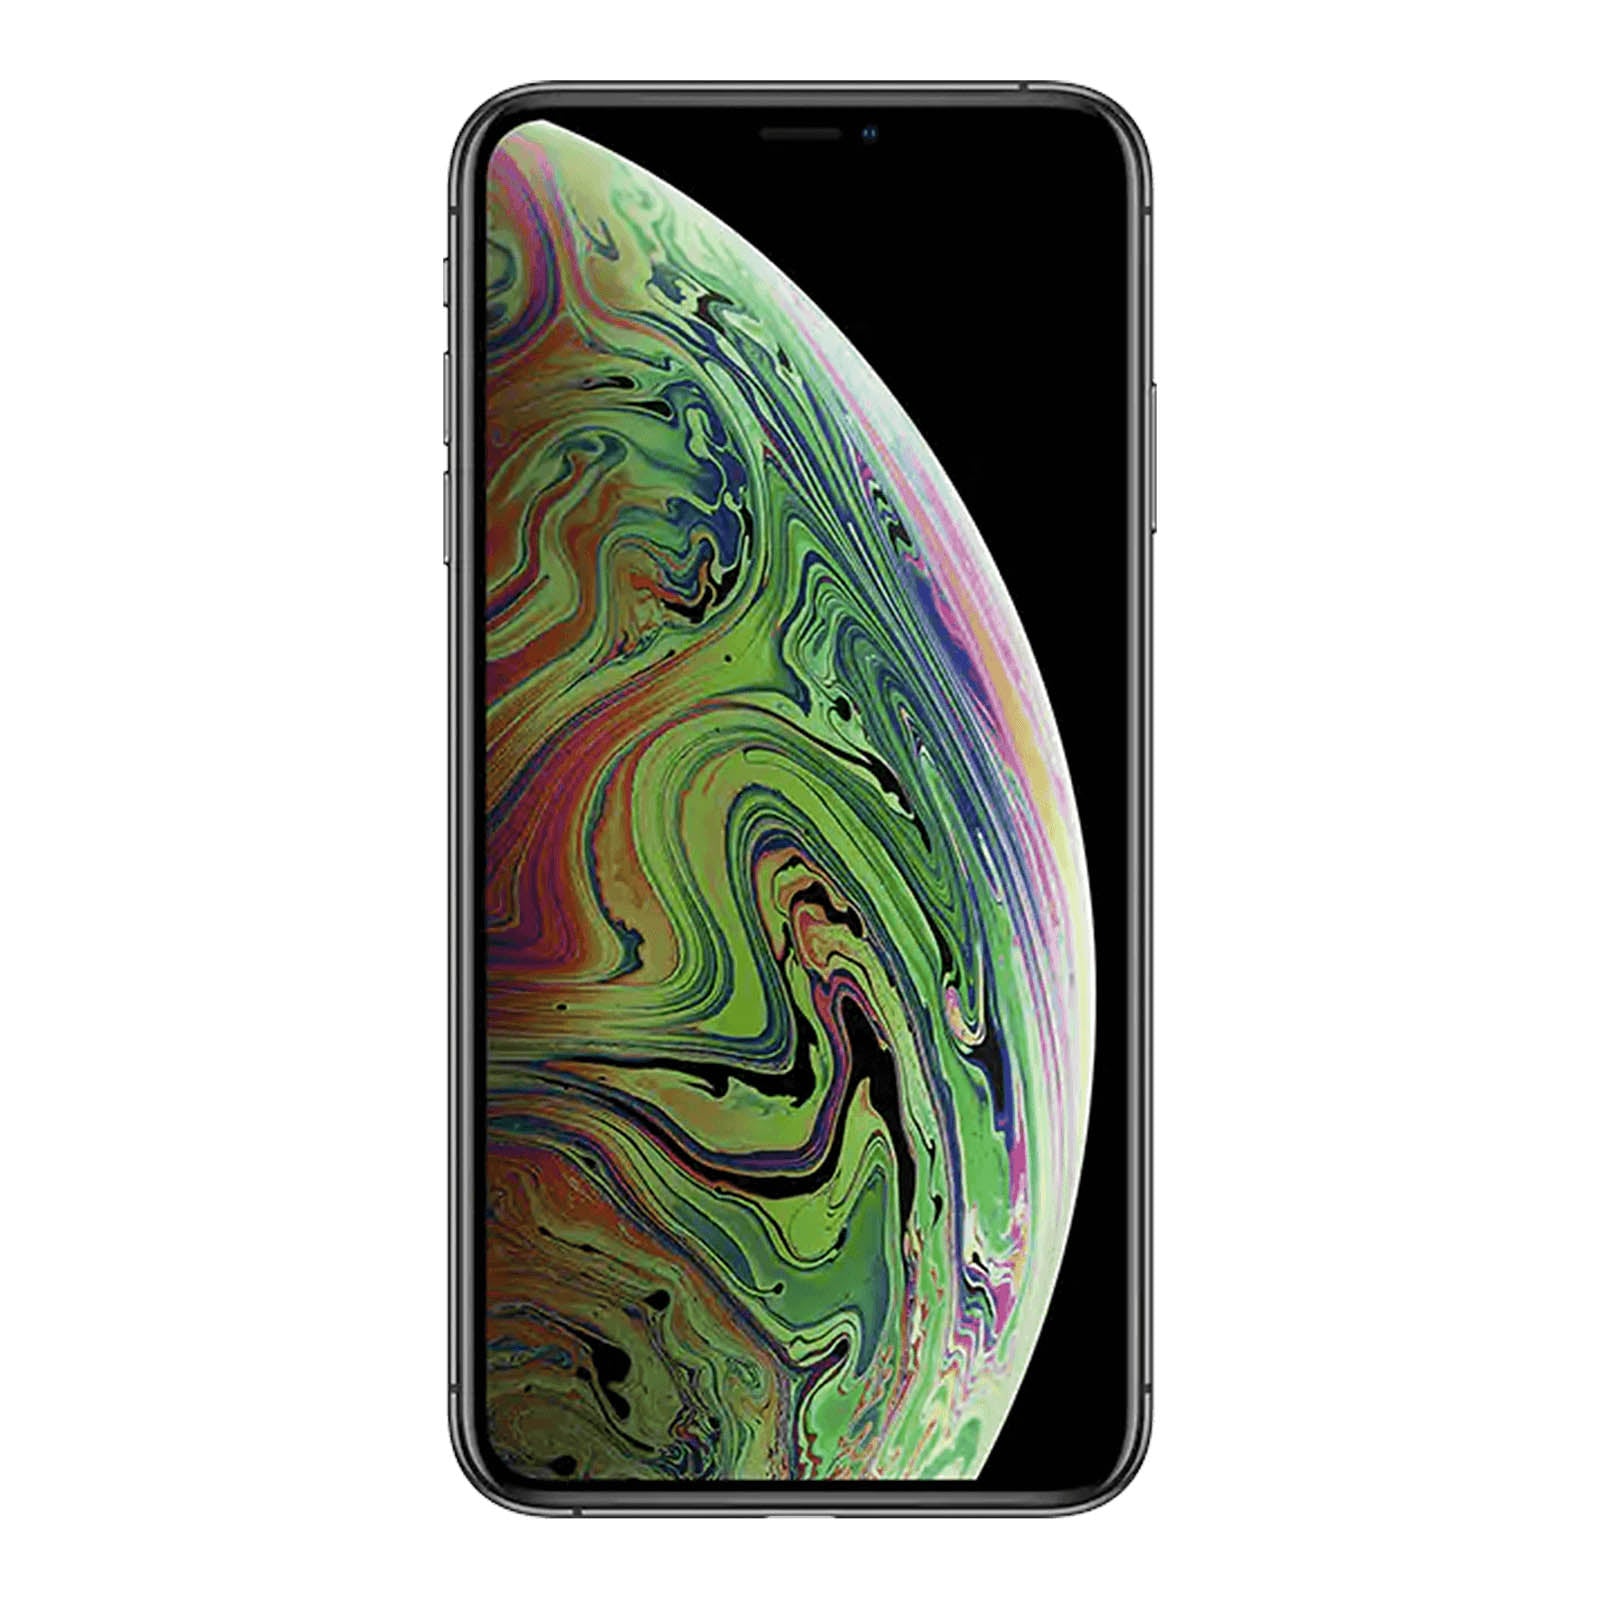 Apple iPhone XS 512GB Space Grey Fair - T-Mobile